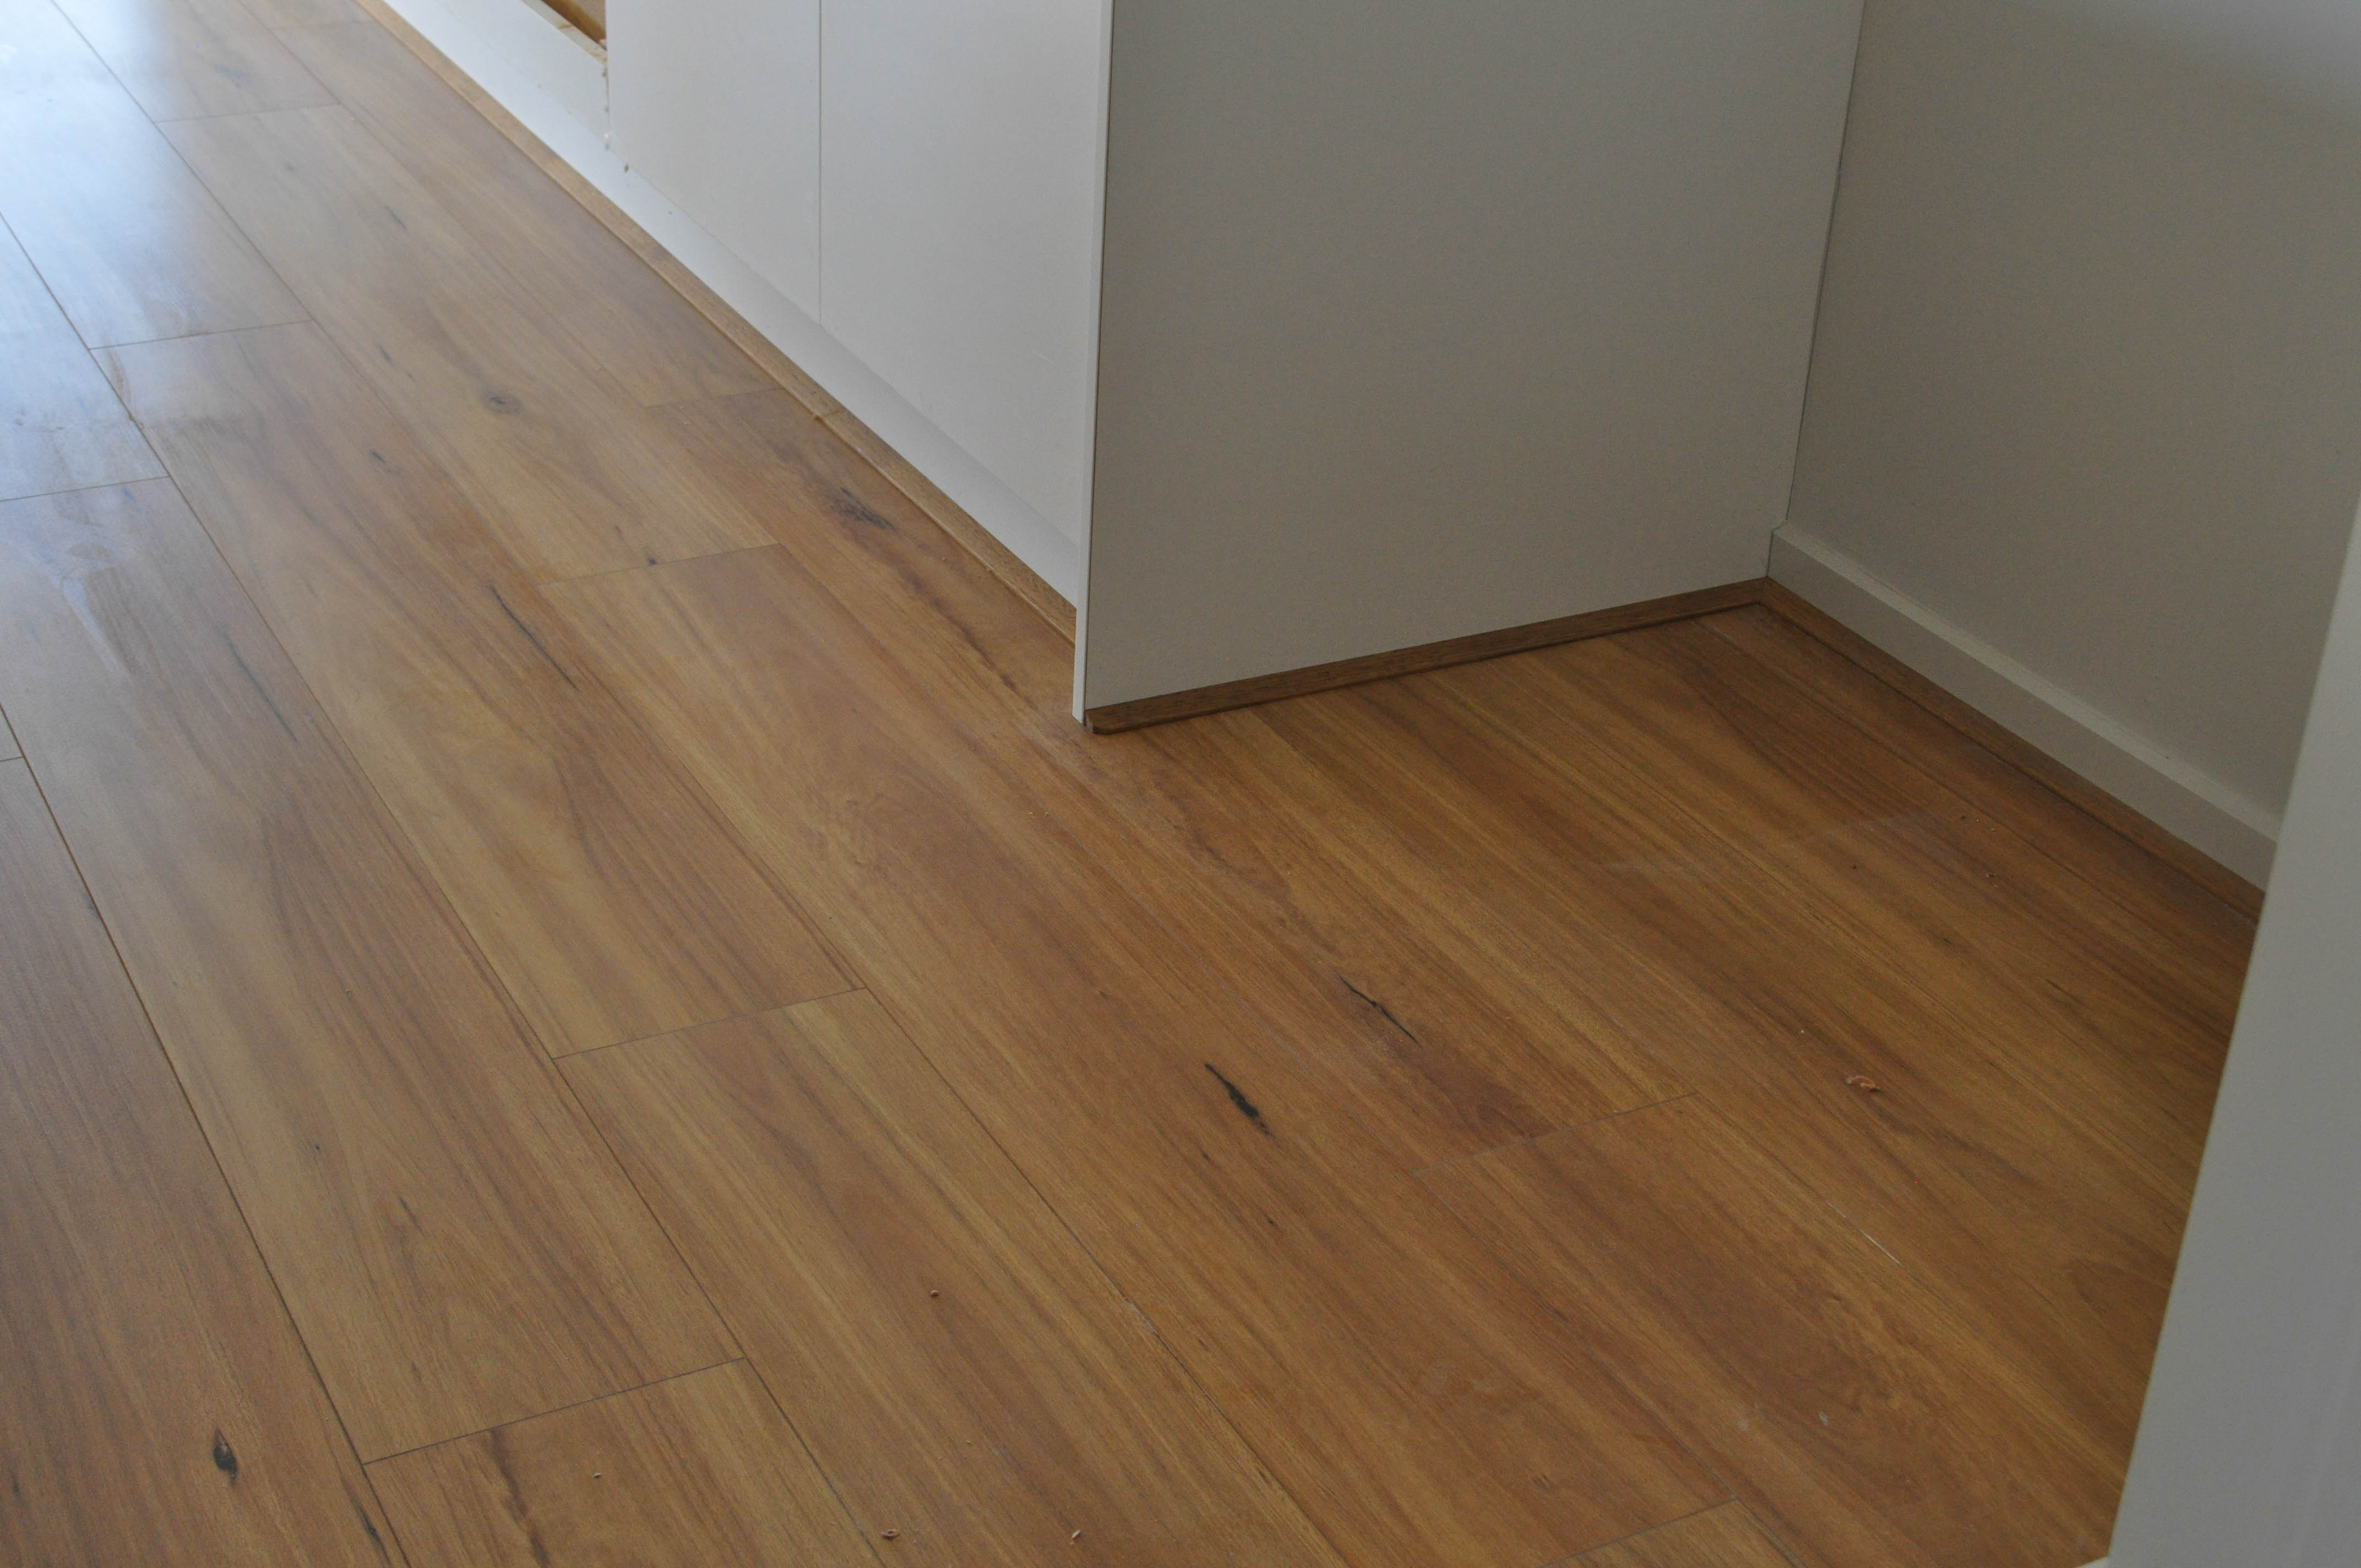 showing a kitchen inside a home where the floor has been floorboarded with cream colored laminate flooring.